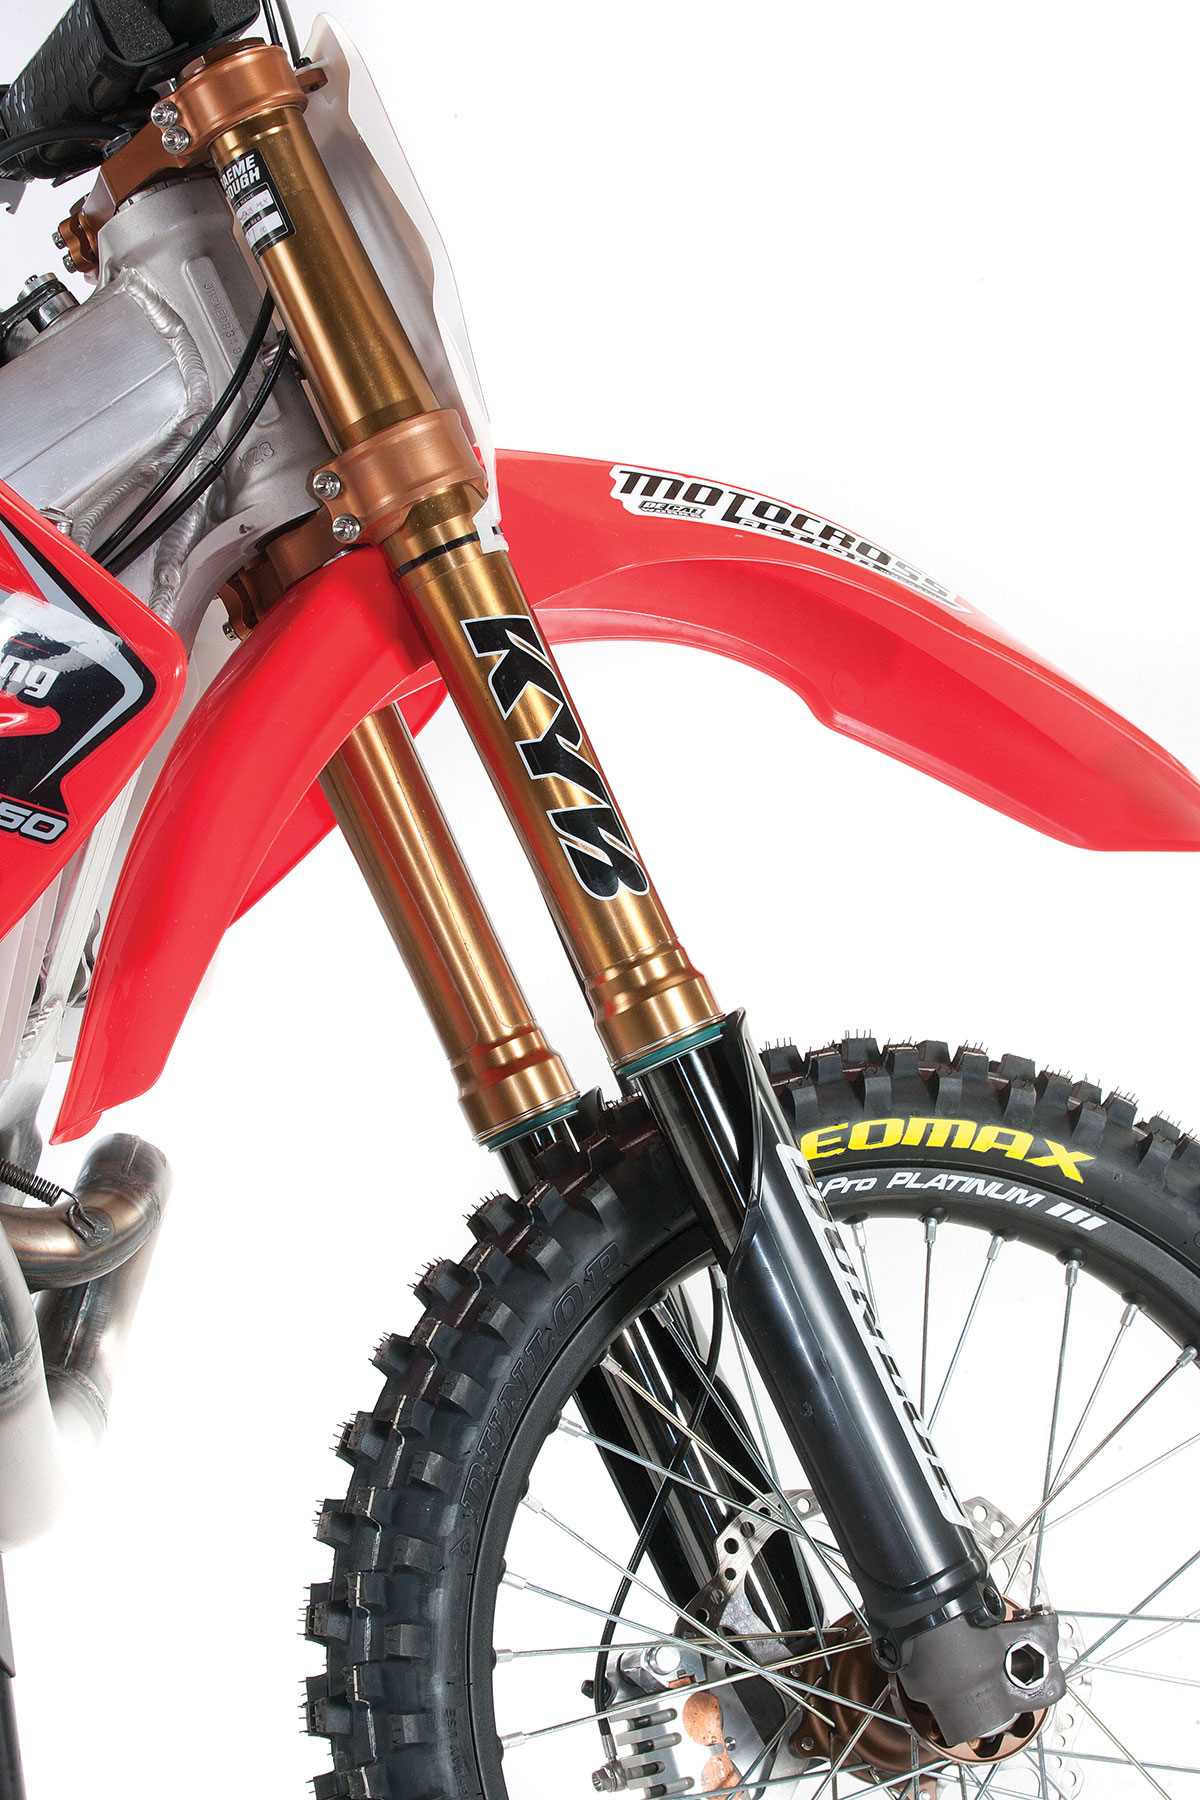 The stock Showa forks were upgraded to Kayaba A-kit components based on the 2012 Honda CRF450 forks. 